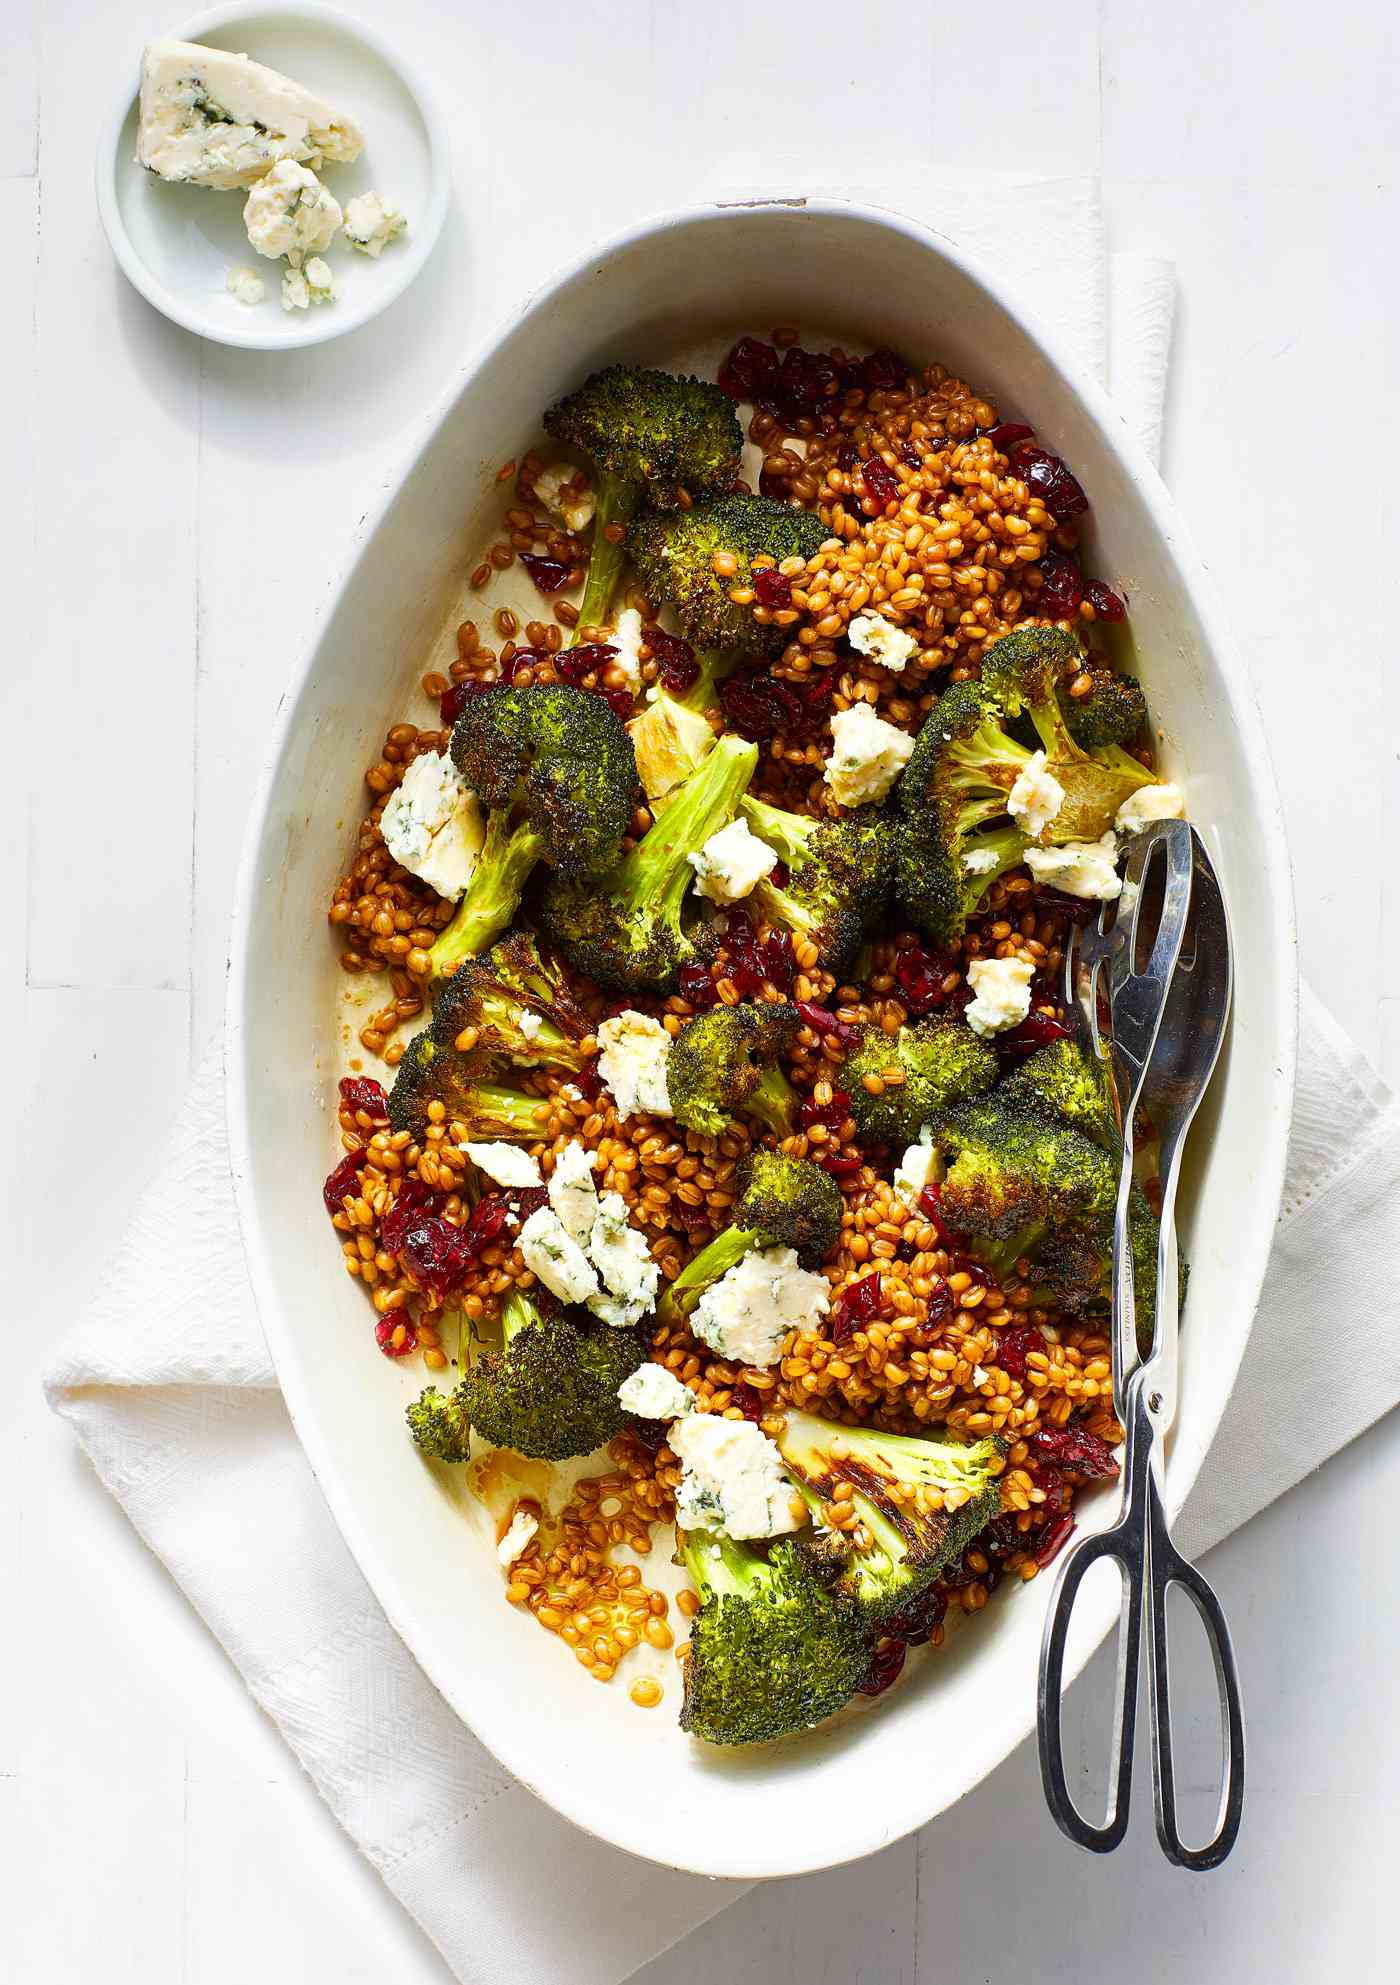 Roasted Broccoli with Wheat Berries, Blue Cheese and Cranberries in oval dish